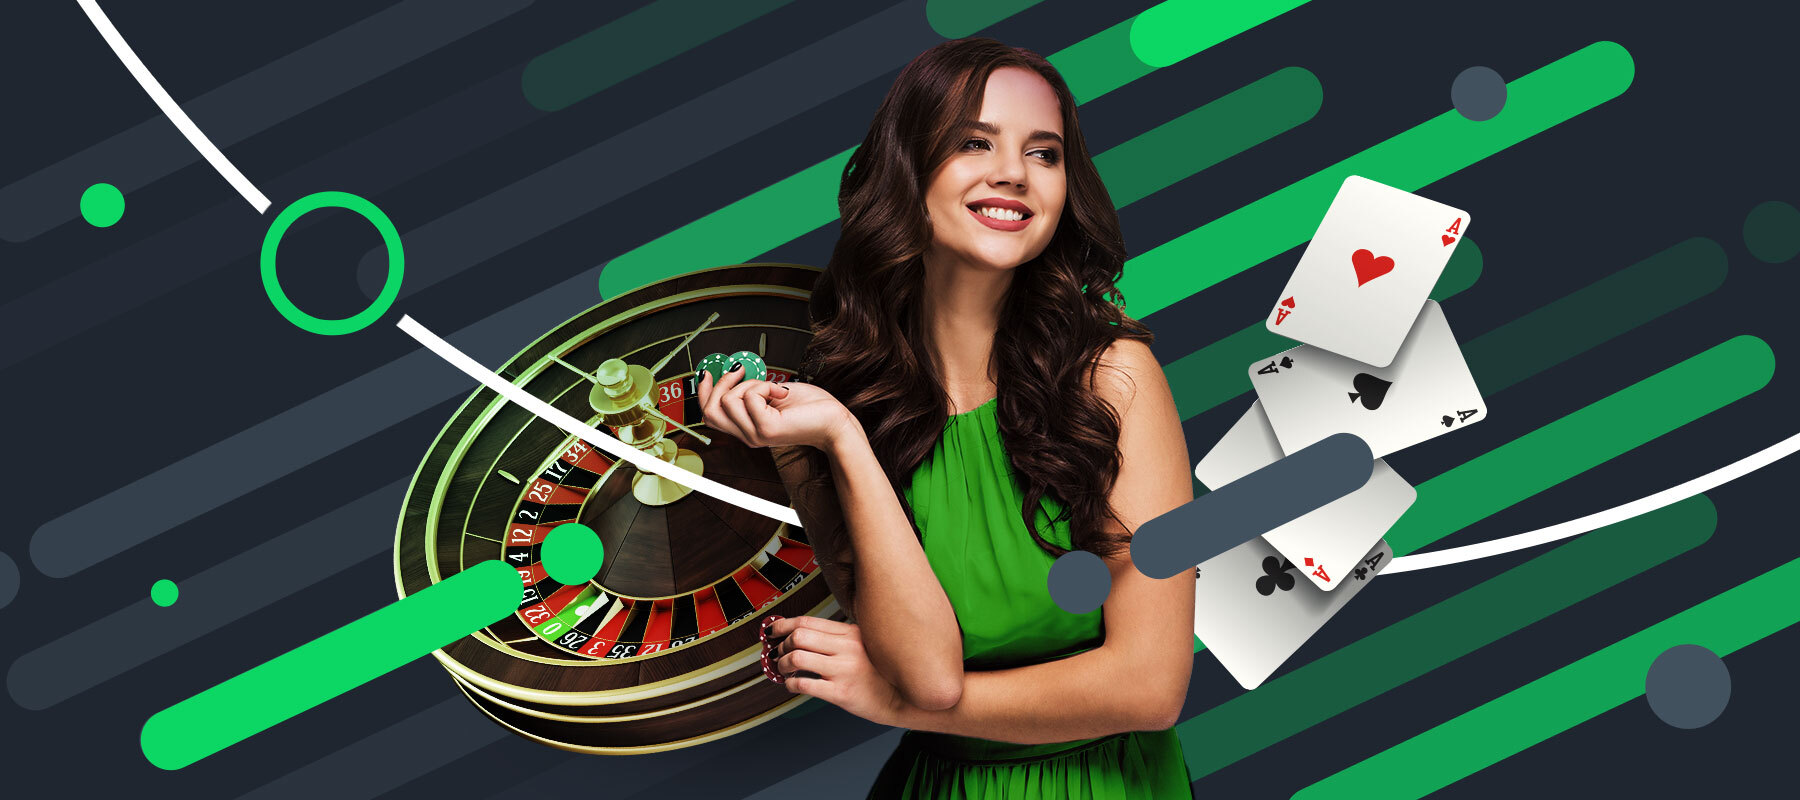 Disadvantages of playing at online casinos and gambling games online